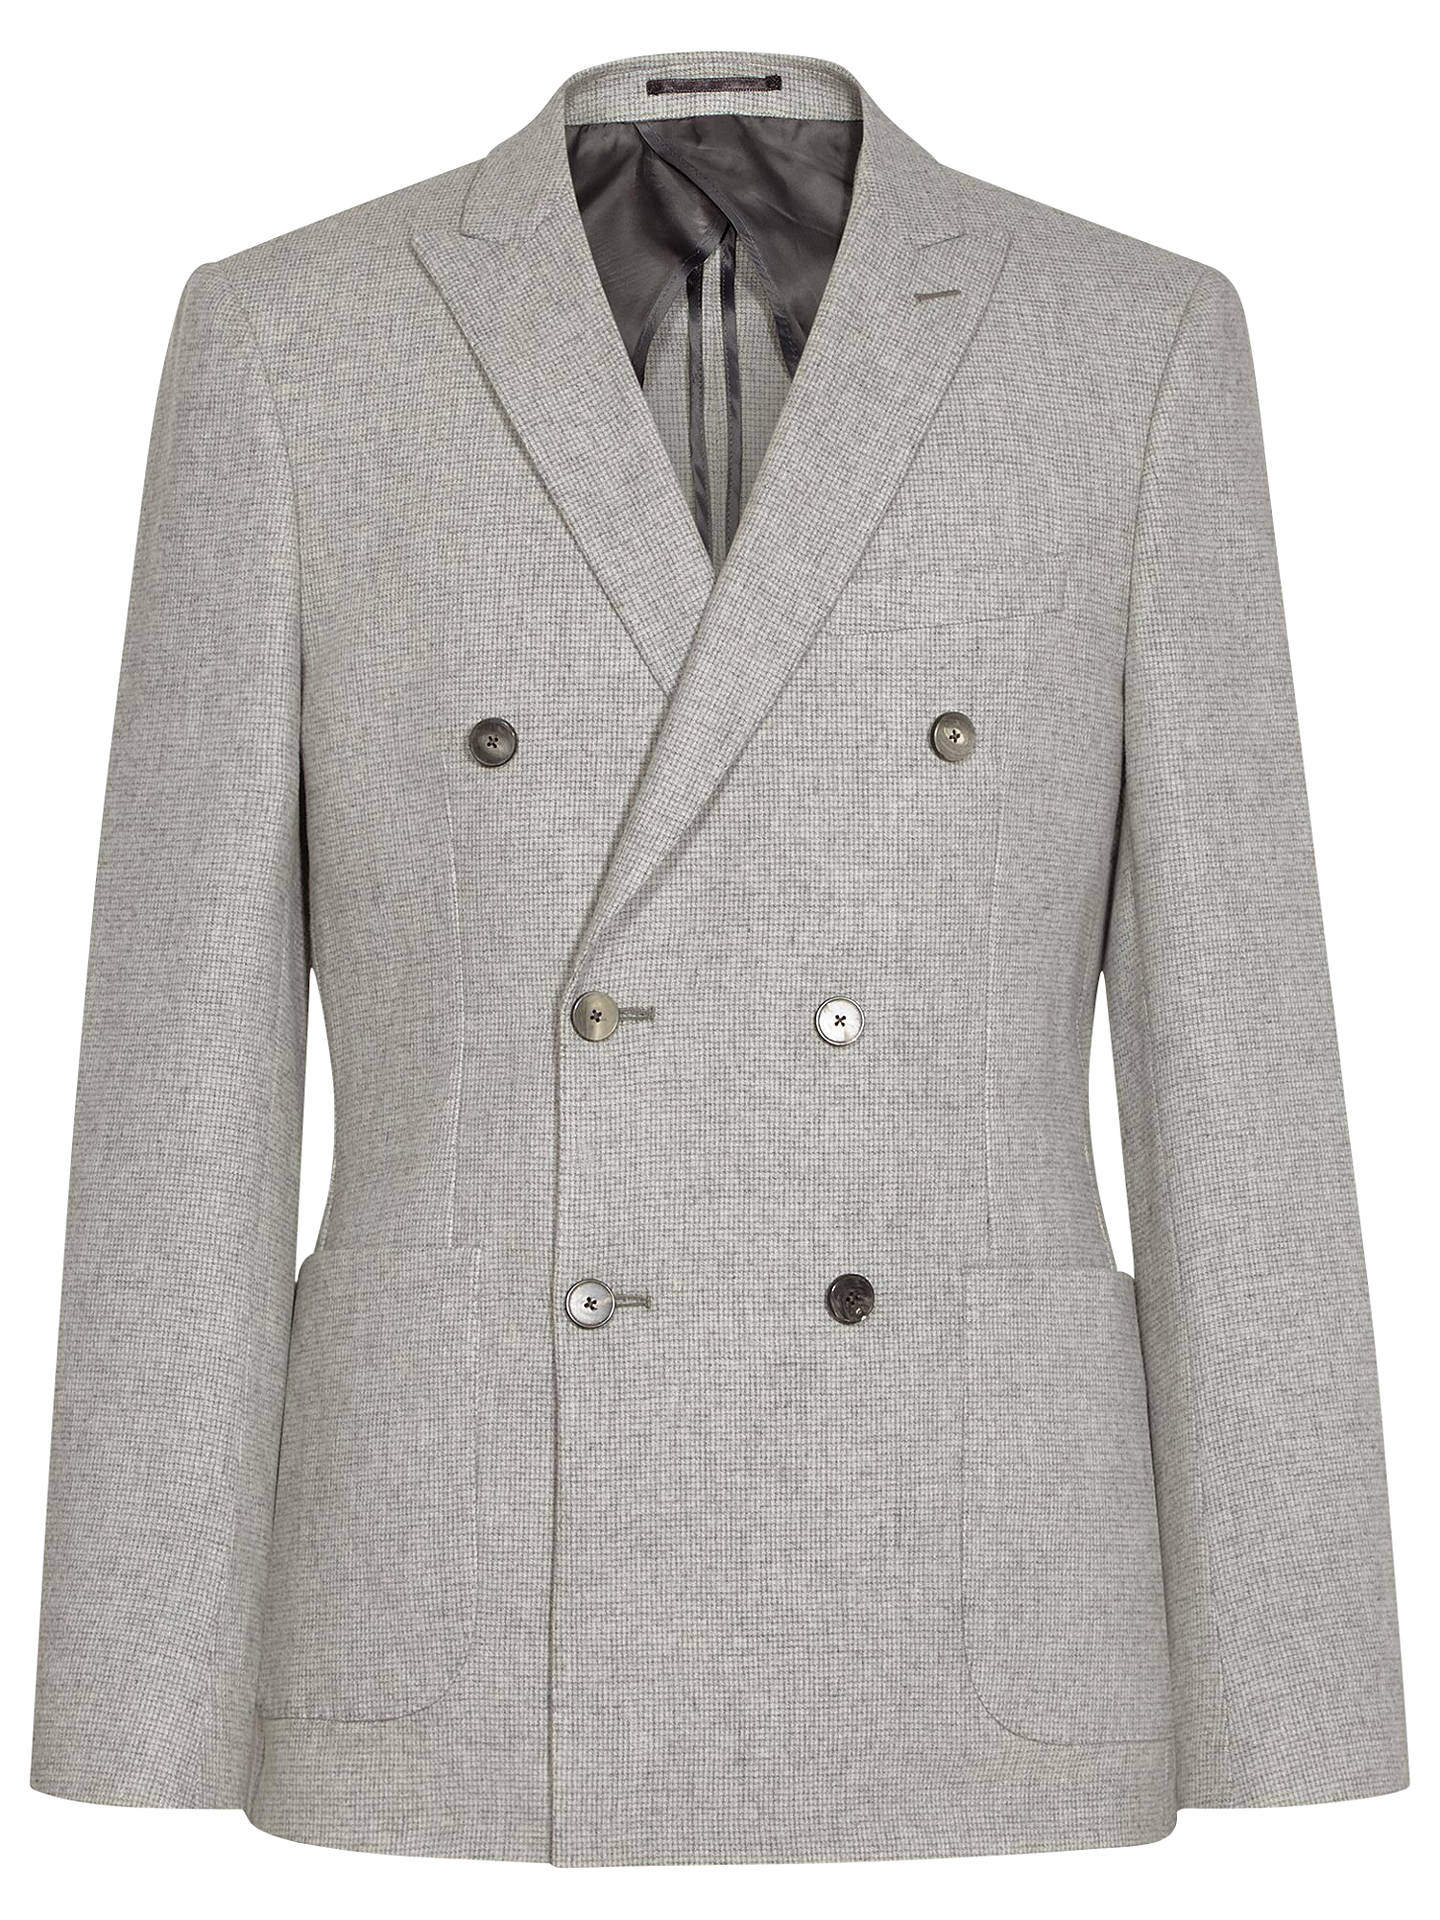 Reiss Carlo Double Breasted Blazer, Light Grey at John Lewis & Partners